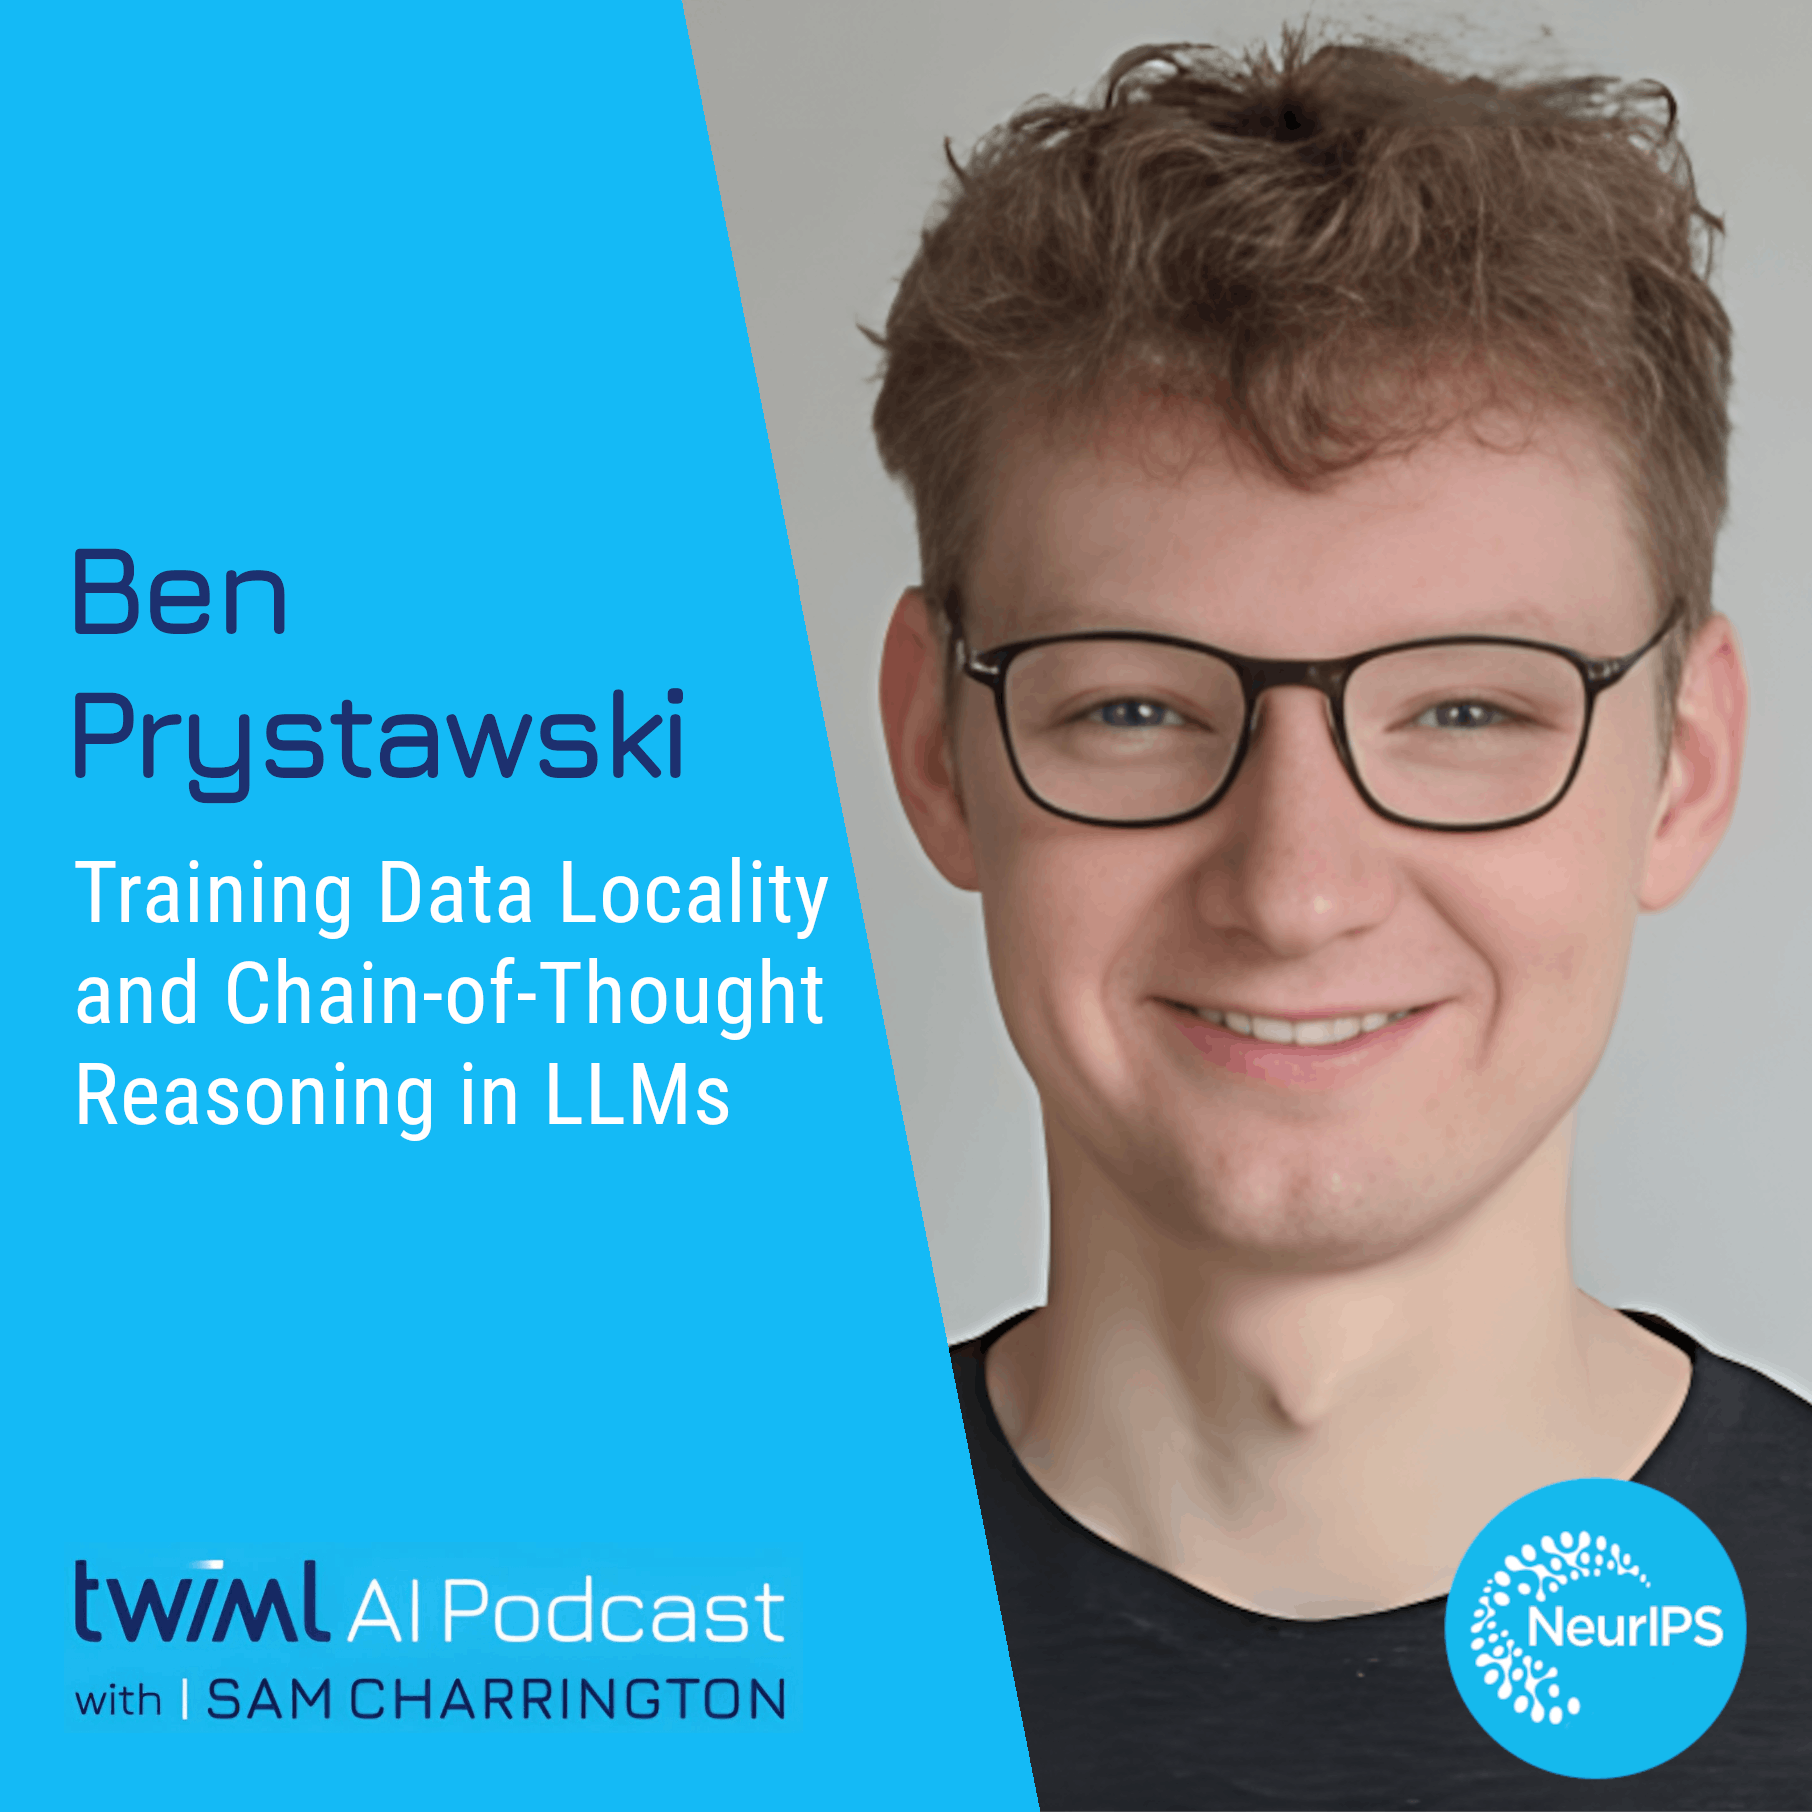 Training Data Locality and Chain-of-Thought Reasoning in LLMs with Ben Prystawski - #673